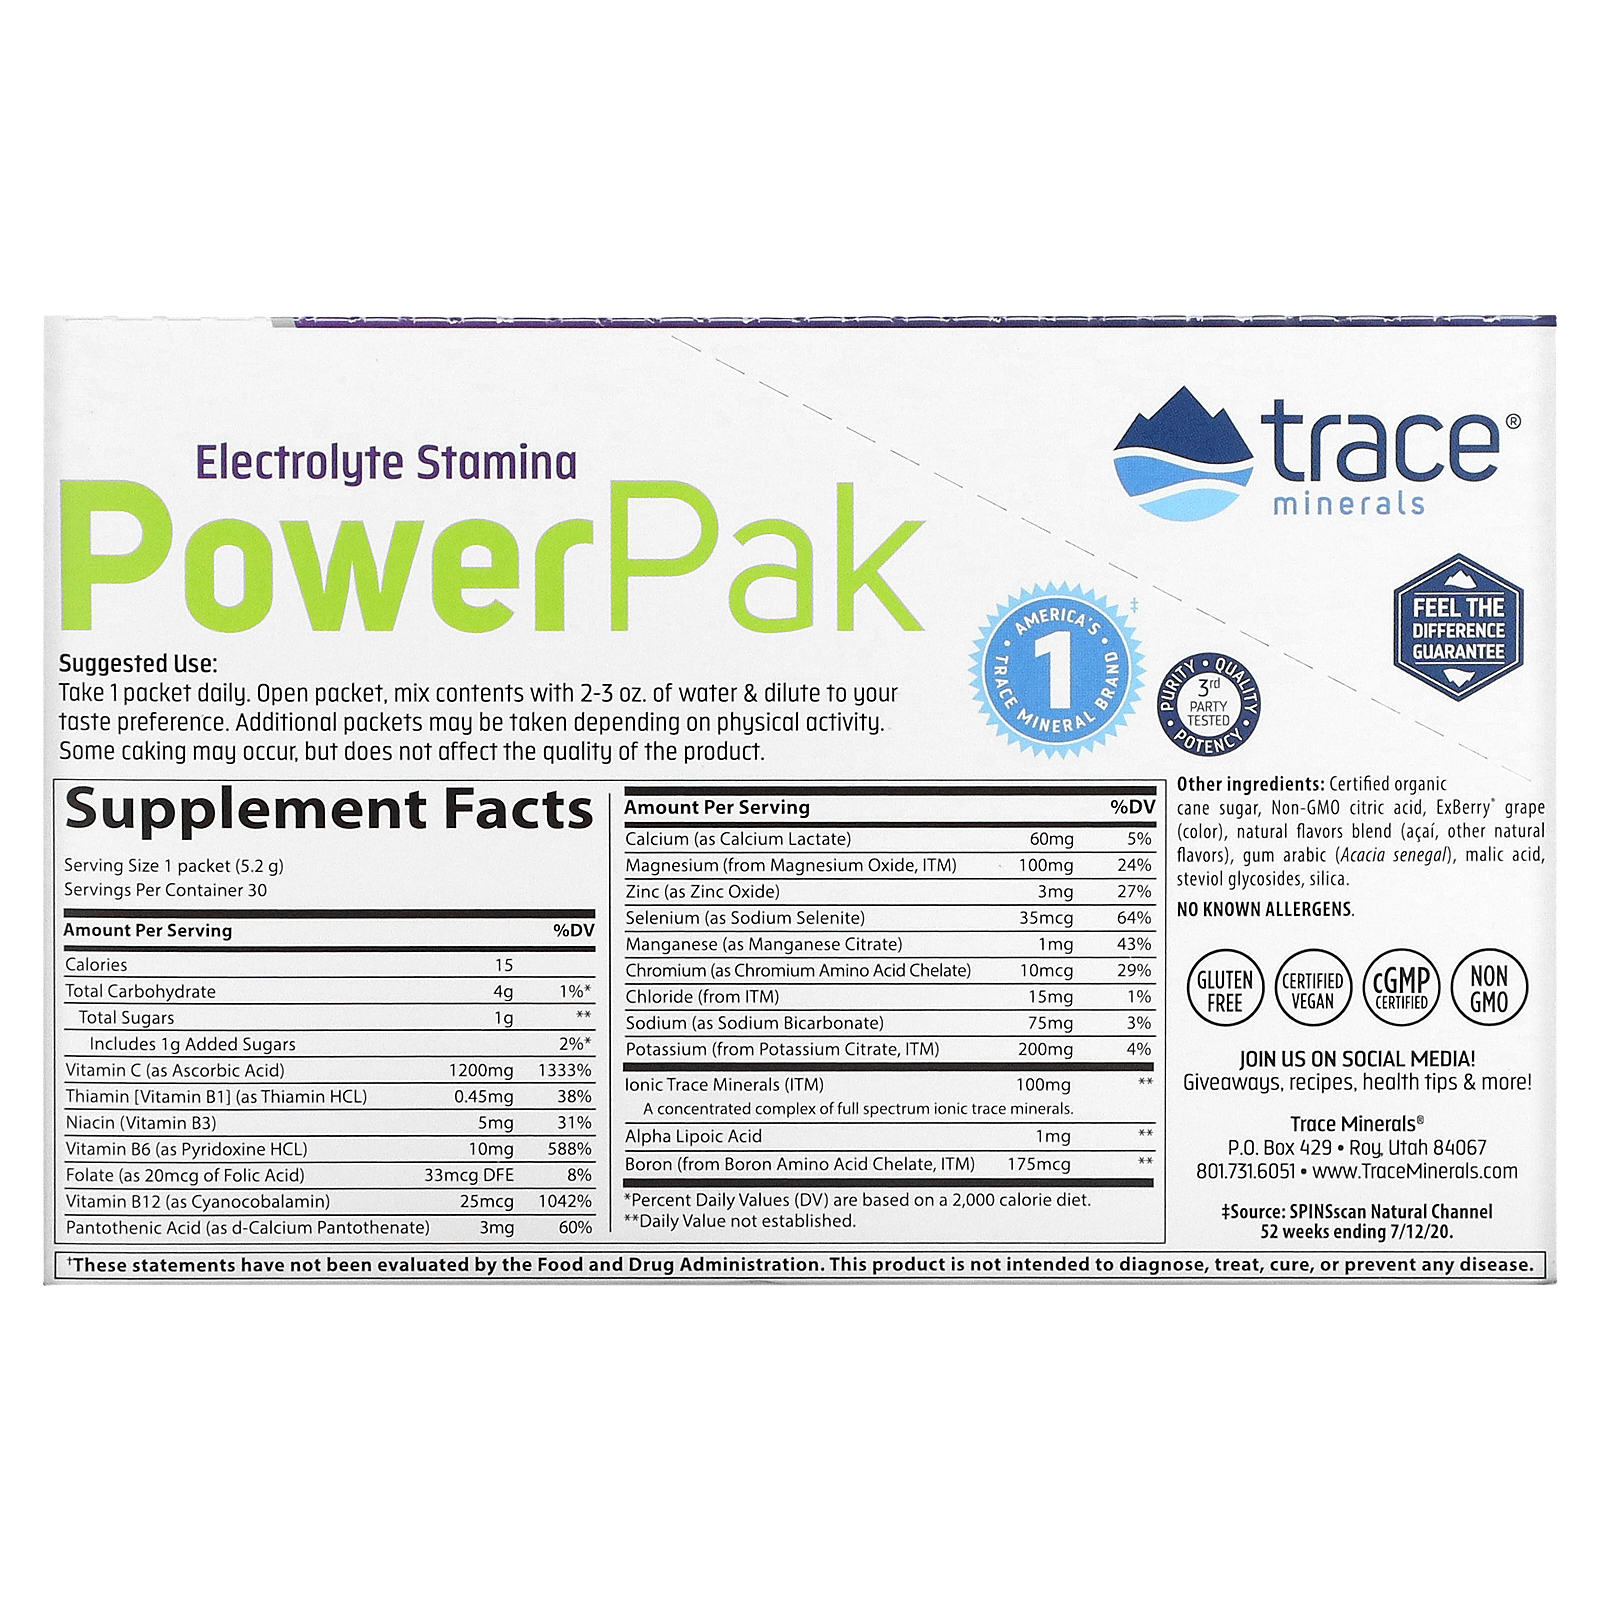 Trace Minerals | Power Pak Electrolyte Powder Packets | 1200mg Vit C | Acai Berry | 156g 30 Packets - image 2 of 2